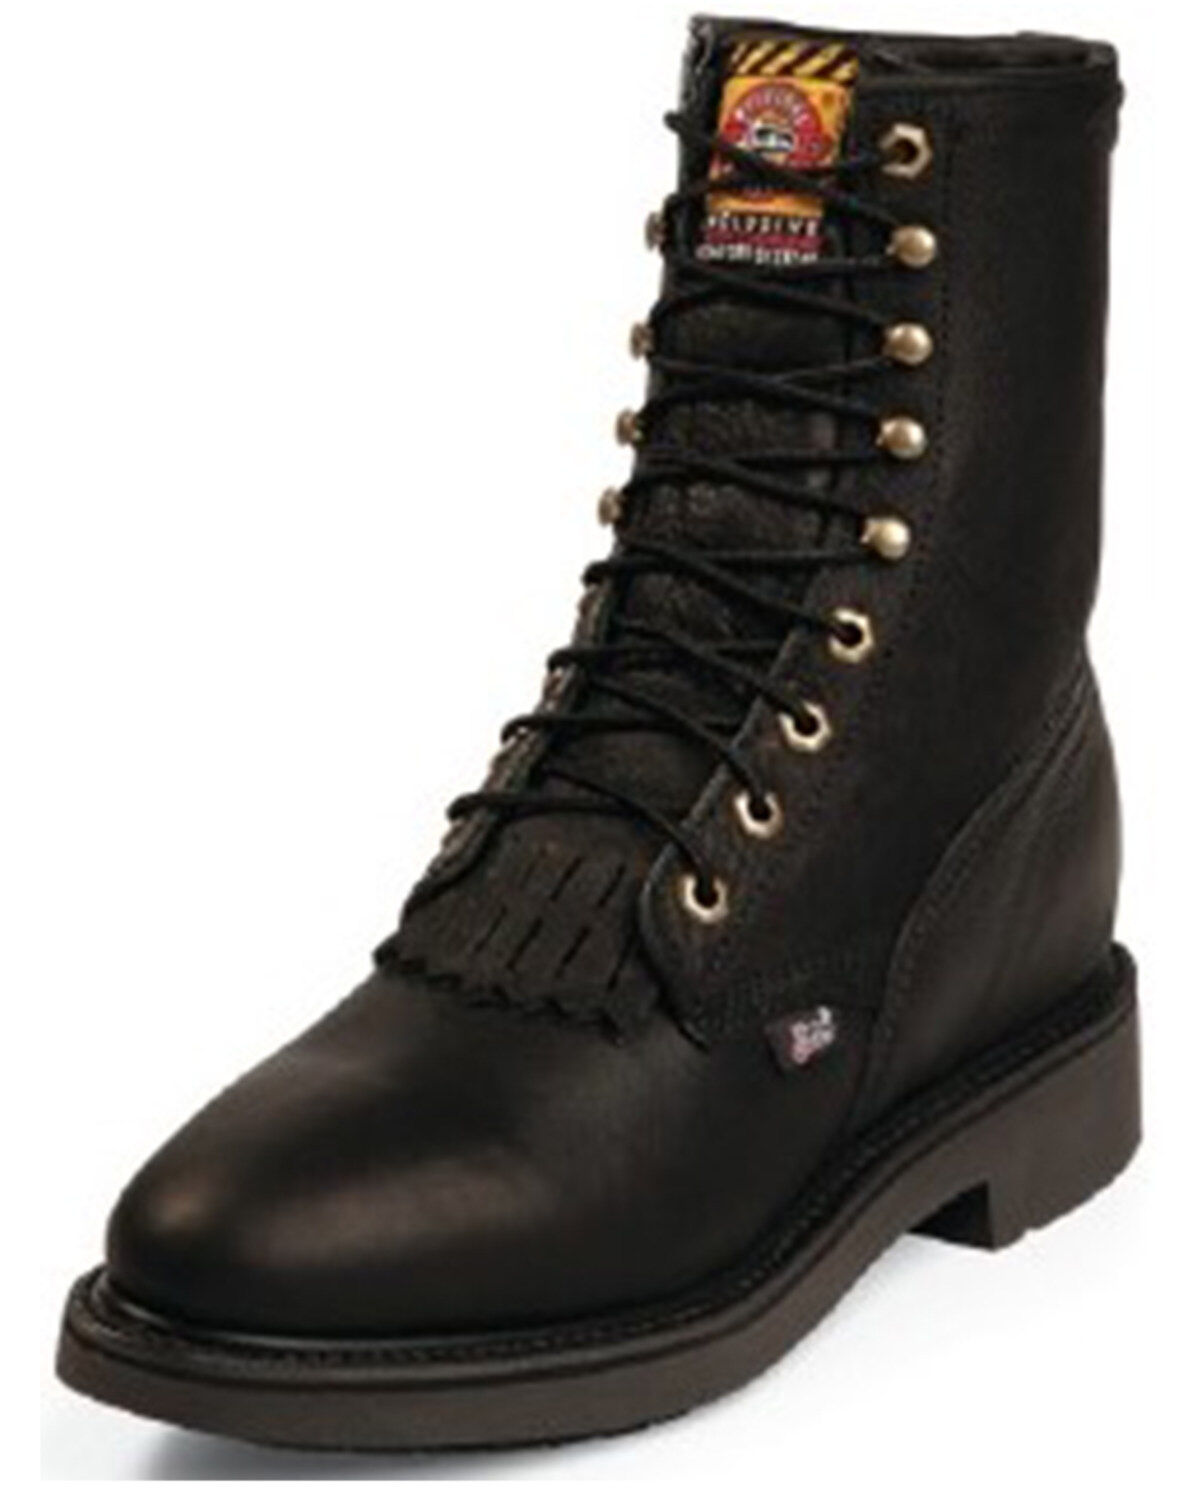 justin 76 work boots